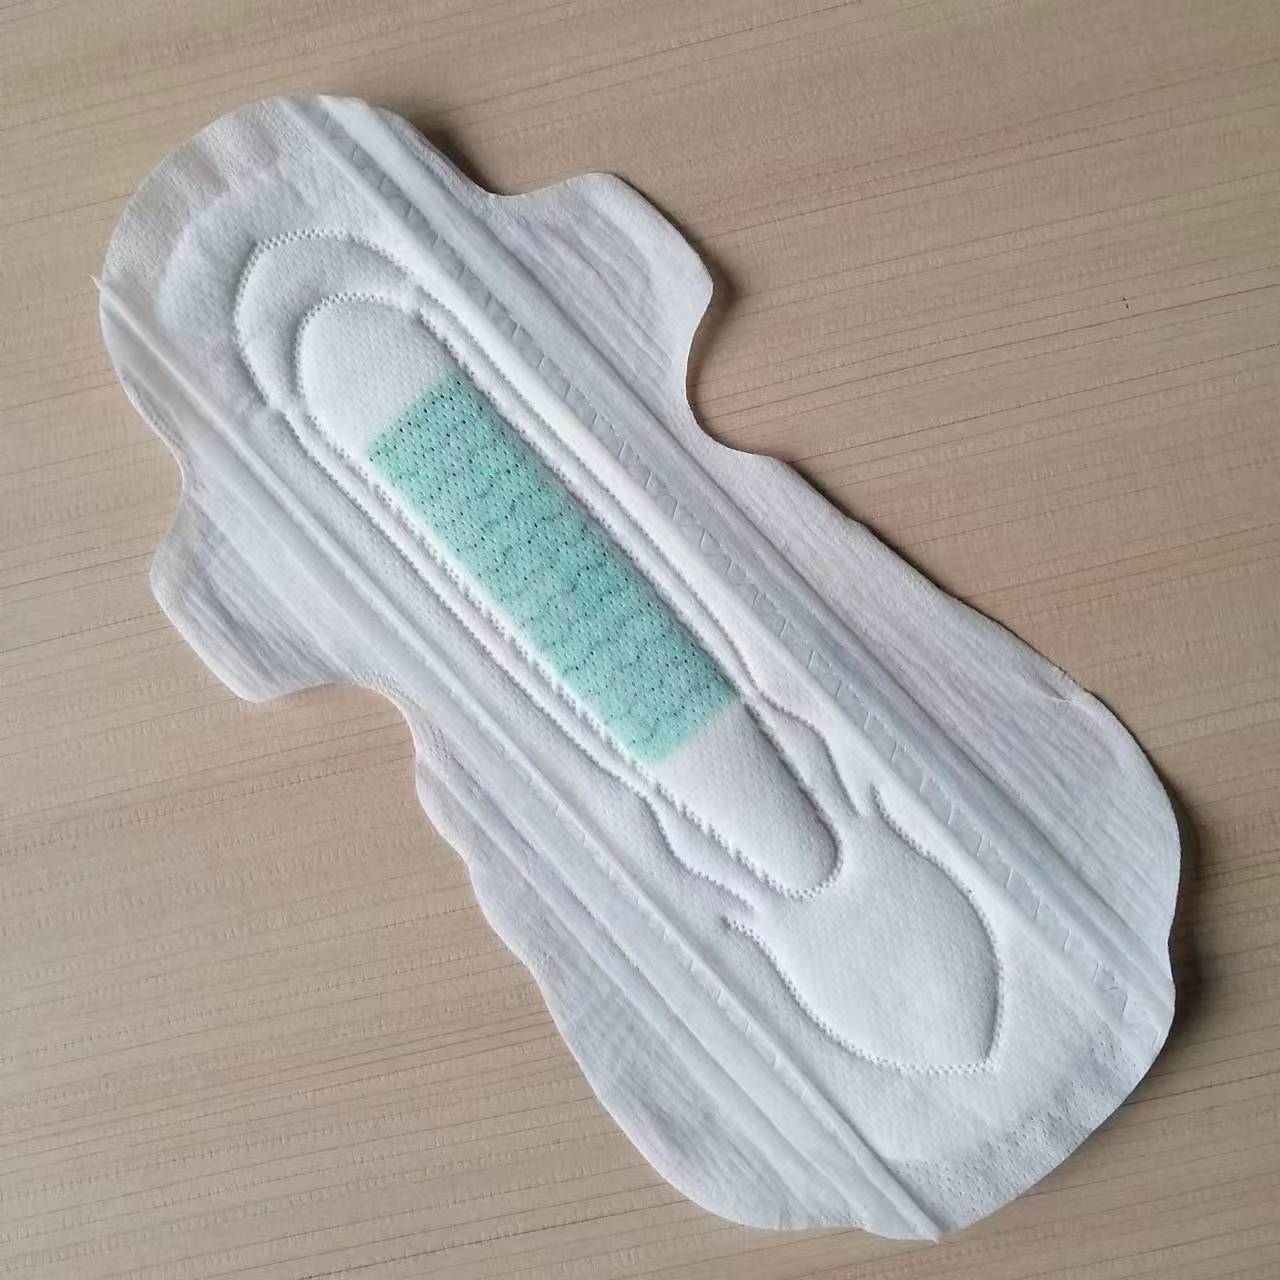 Menstrual Pads Menstrual Panty Liner Napkin Period Cloth pad Scalloped fin  Hygiene Panty Liner Menstrual Pad Mother Ear Paper Napkin Incontinence Pads